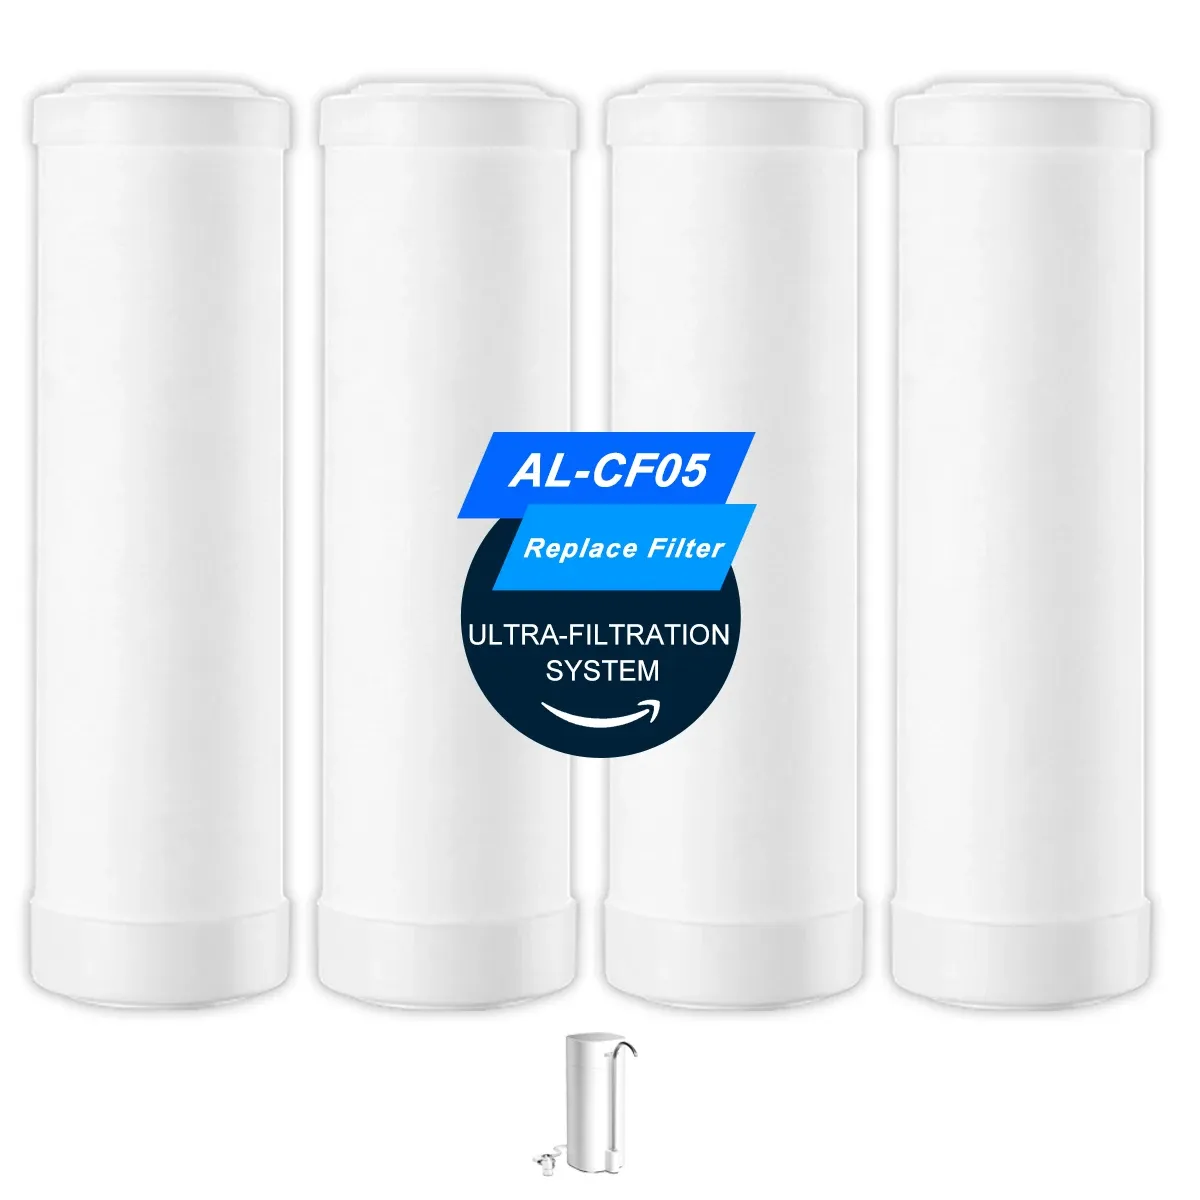 Purifiers Replace Filter for Althy Alcf05 Countertop Faucet Drinking Water Filter Purifier Ultrafiltration System